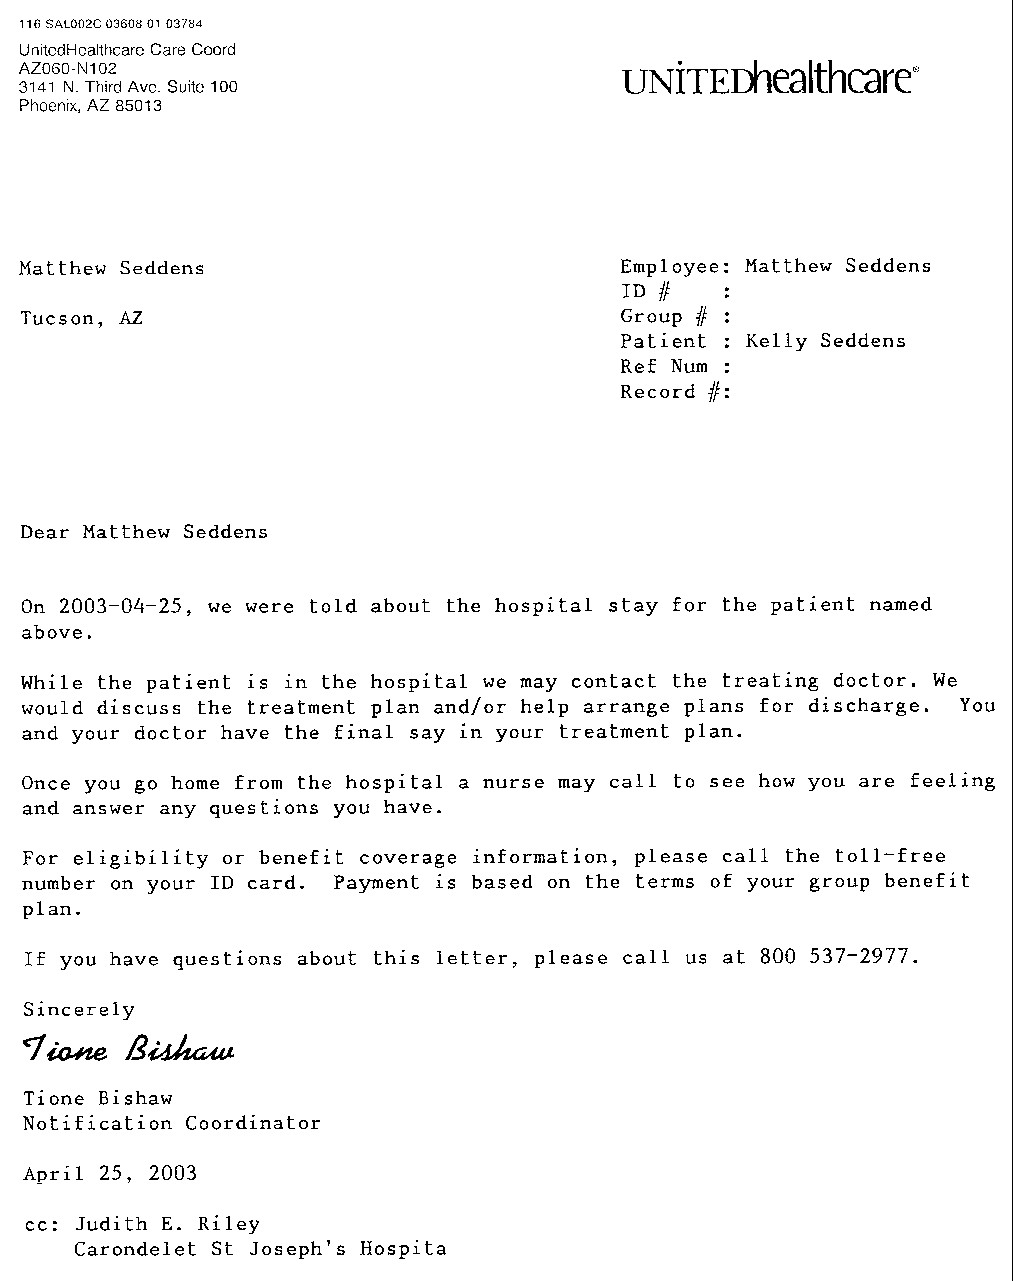 Ectopic Pregnancy Foundation Letter From Insurance Company After